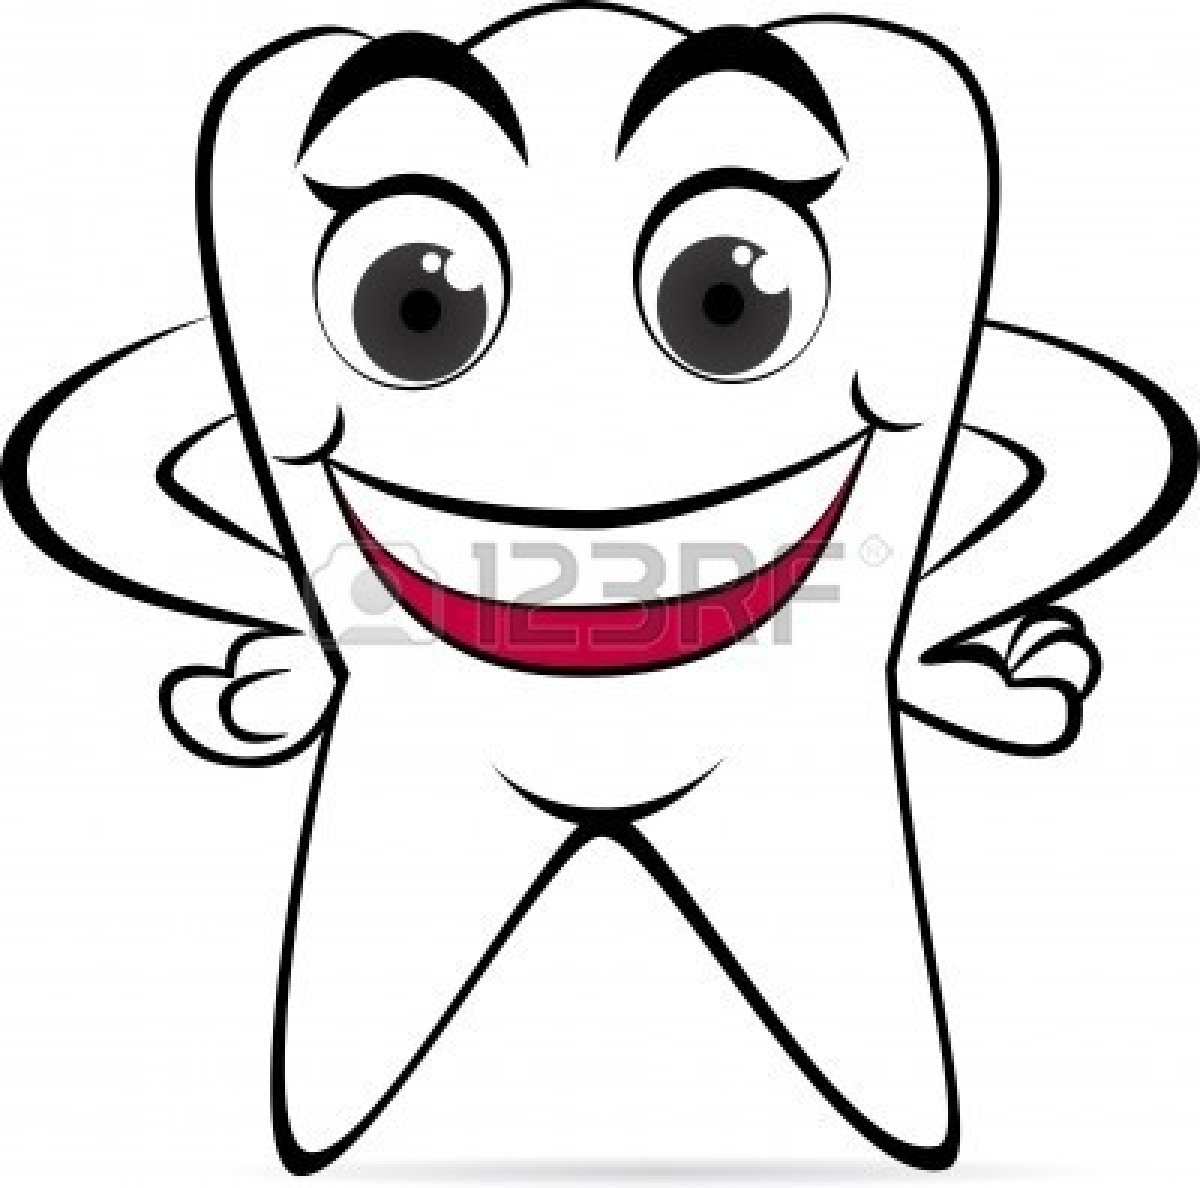 Happy Tooth Clip Art   Clipart Panda   Free Clipart Images